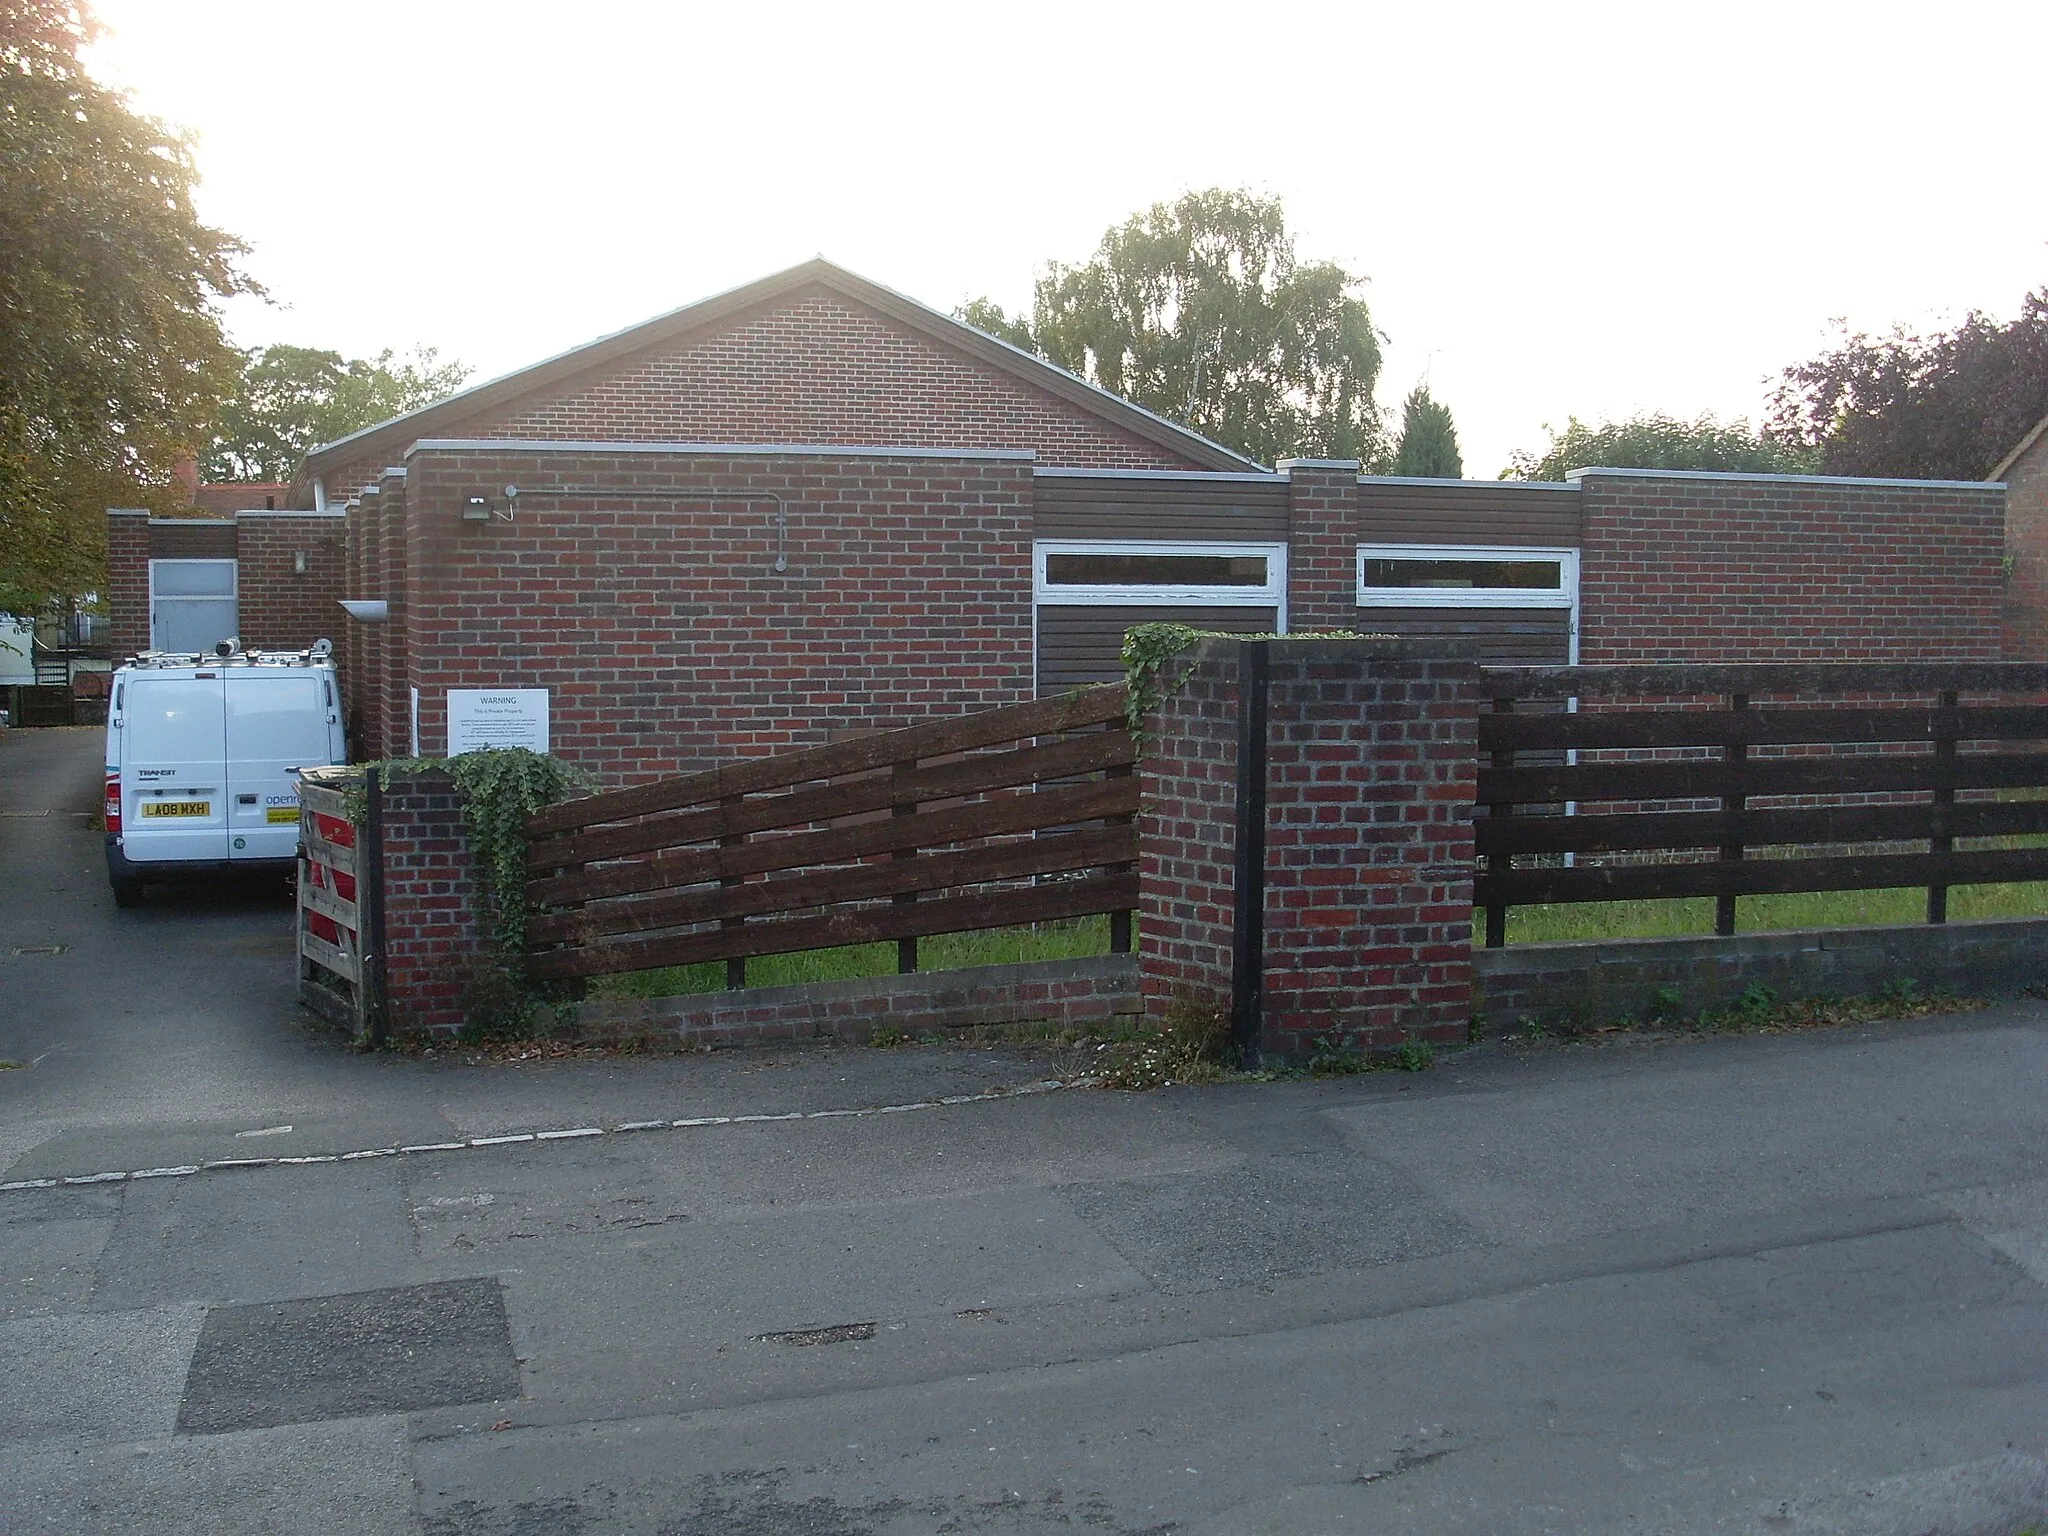 Photo showing: Wargrave Telephone Exchange, Berks Situated in Backsideans off the B477 School Lane, this TE dates from the late 1960s replacing the former Manual TE. It now has (01189) 40xxxx numbers and its postcode is RG10 8JT.